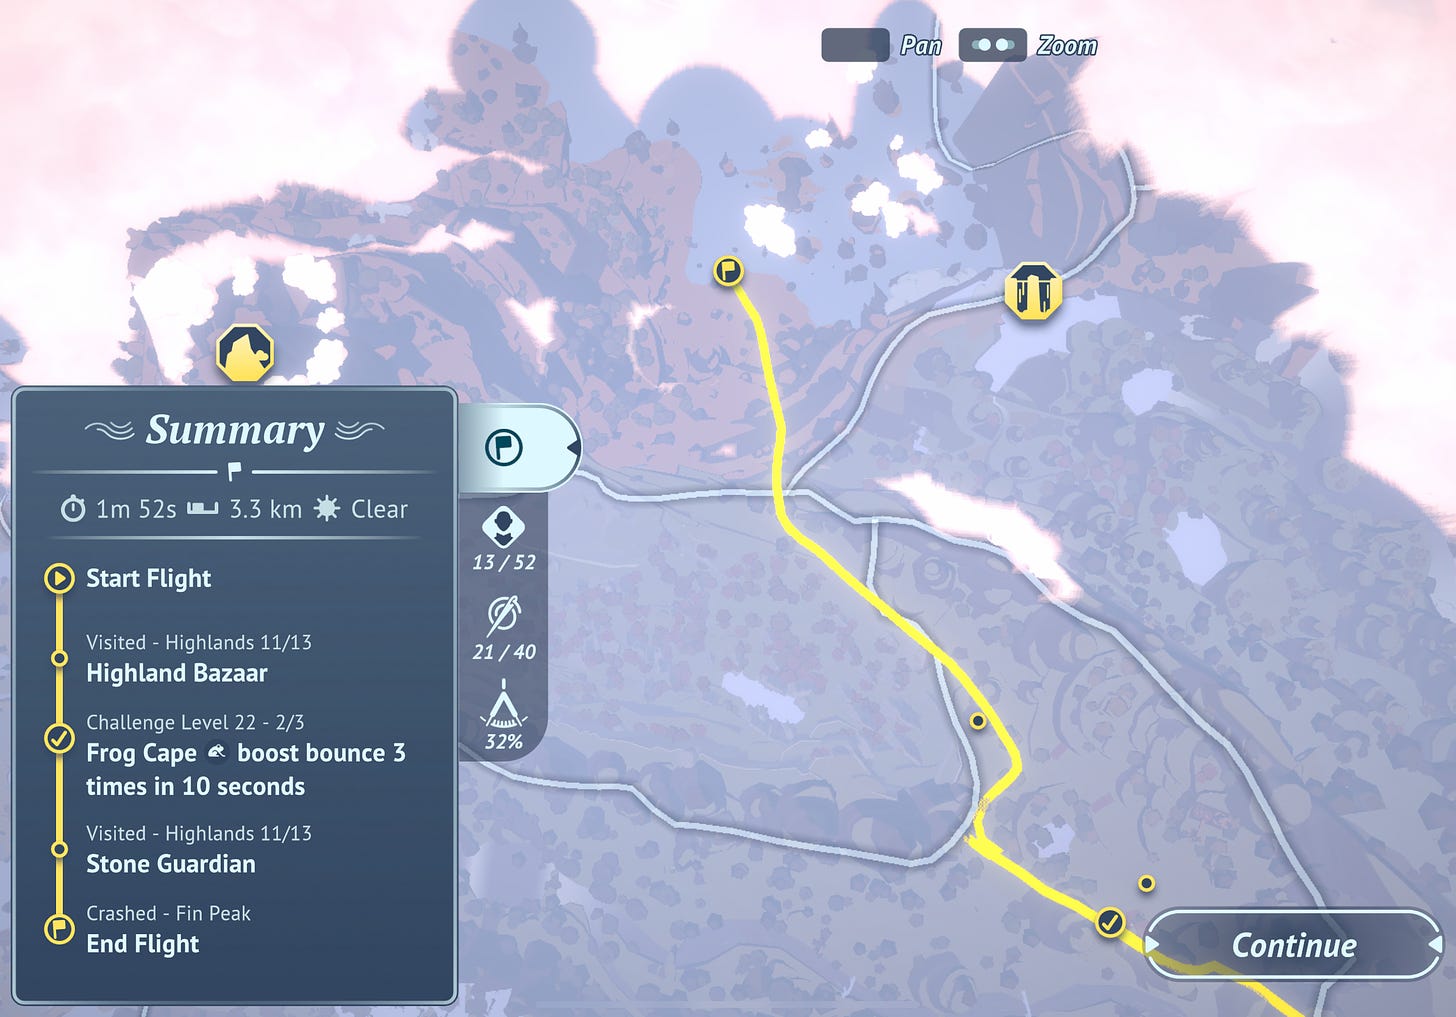 Top down map summary with a route highlight in yellow, and a list of events during the flight, like areas visited.